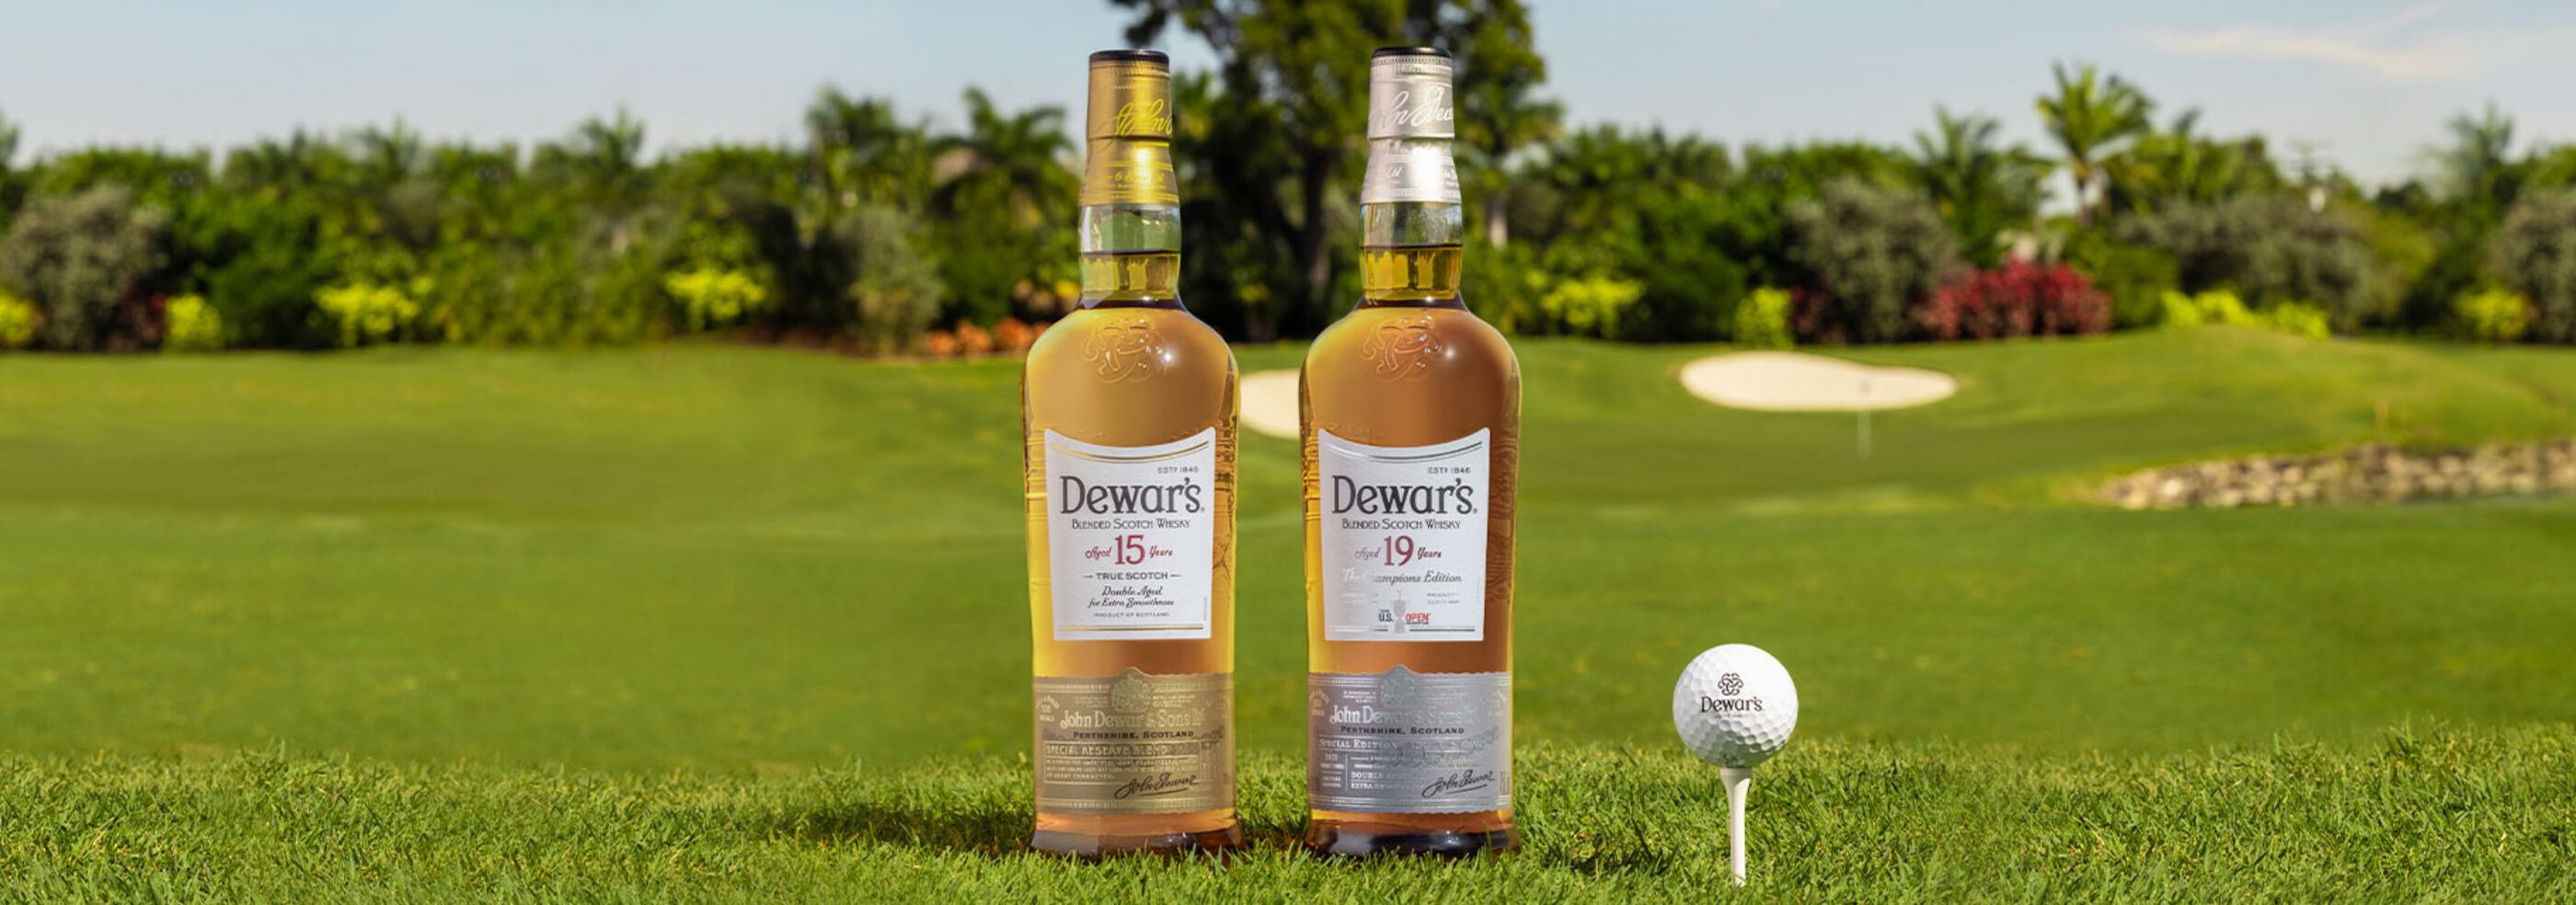 Dewar's Aged 15 Years and Aged 19 Years bottles beside a golf ball on a tee on golf course turf